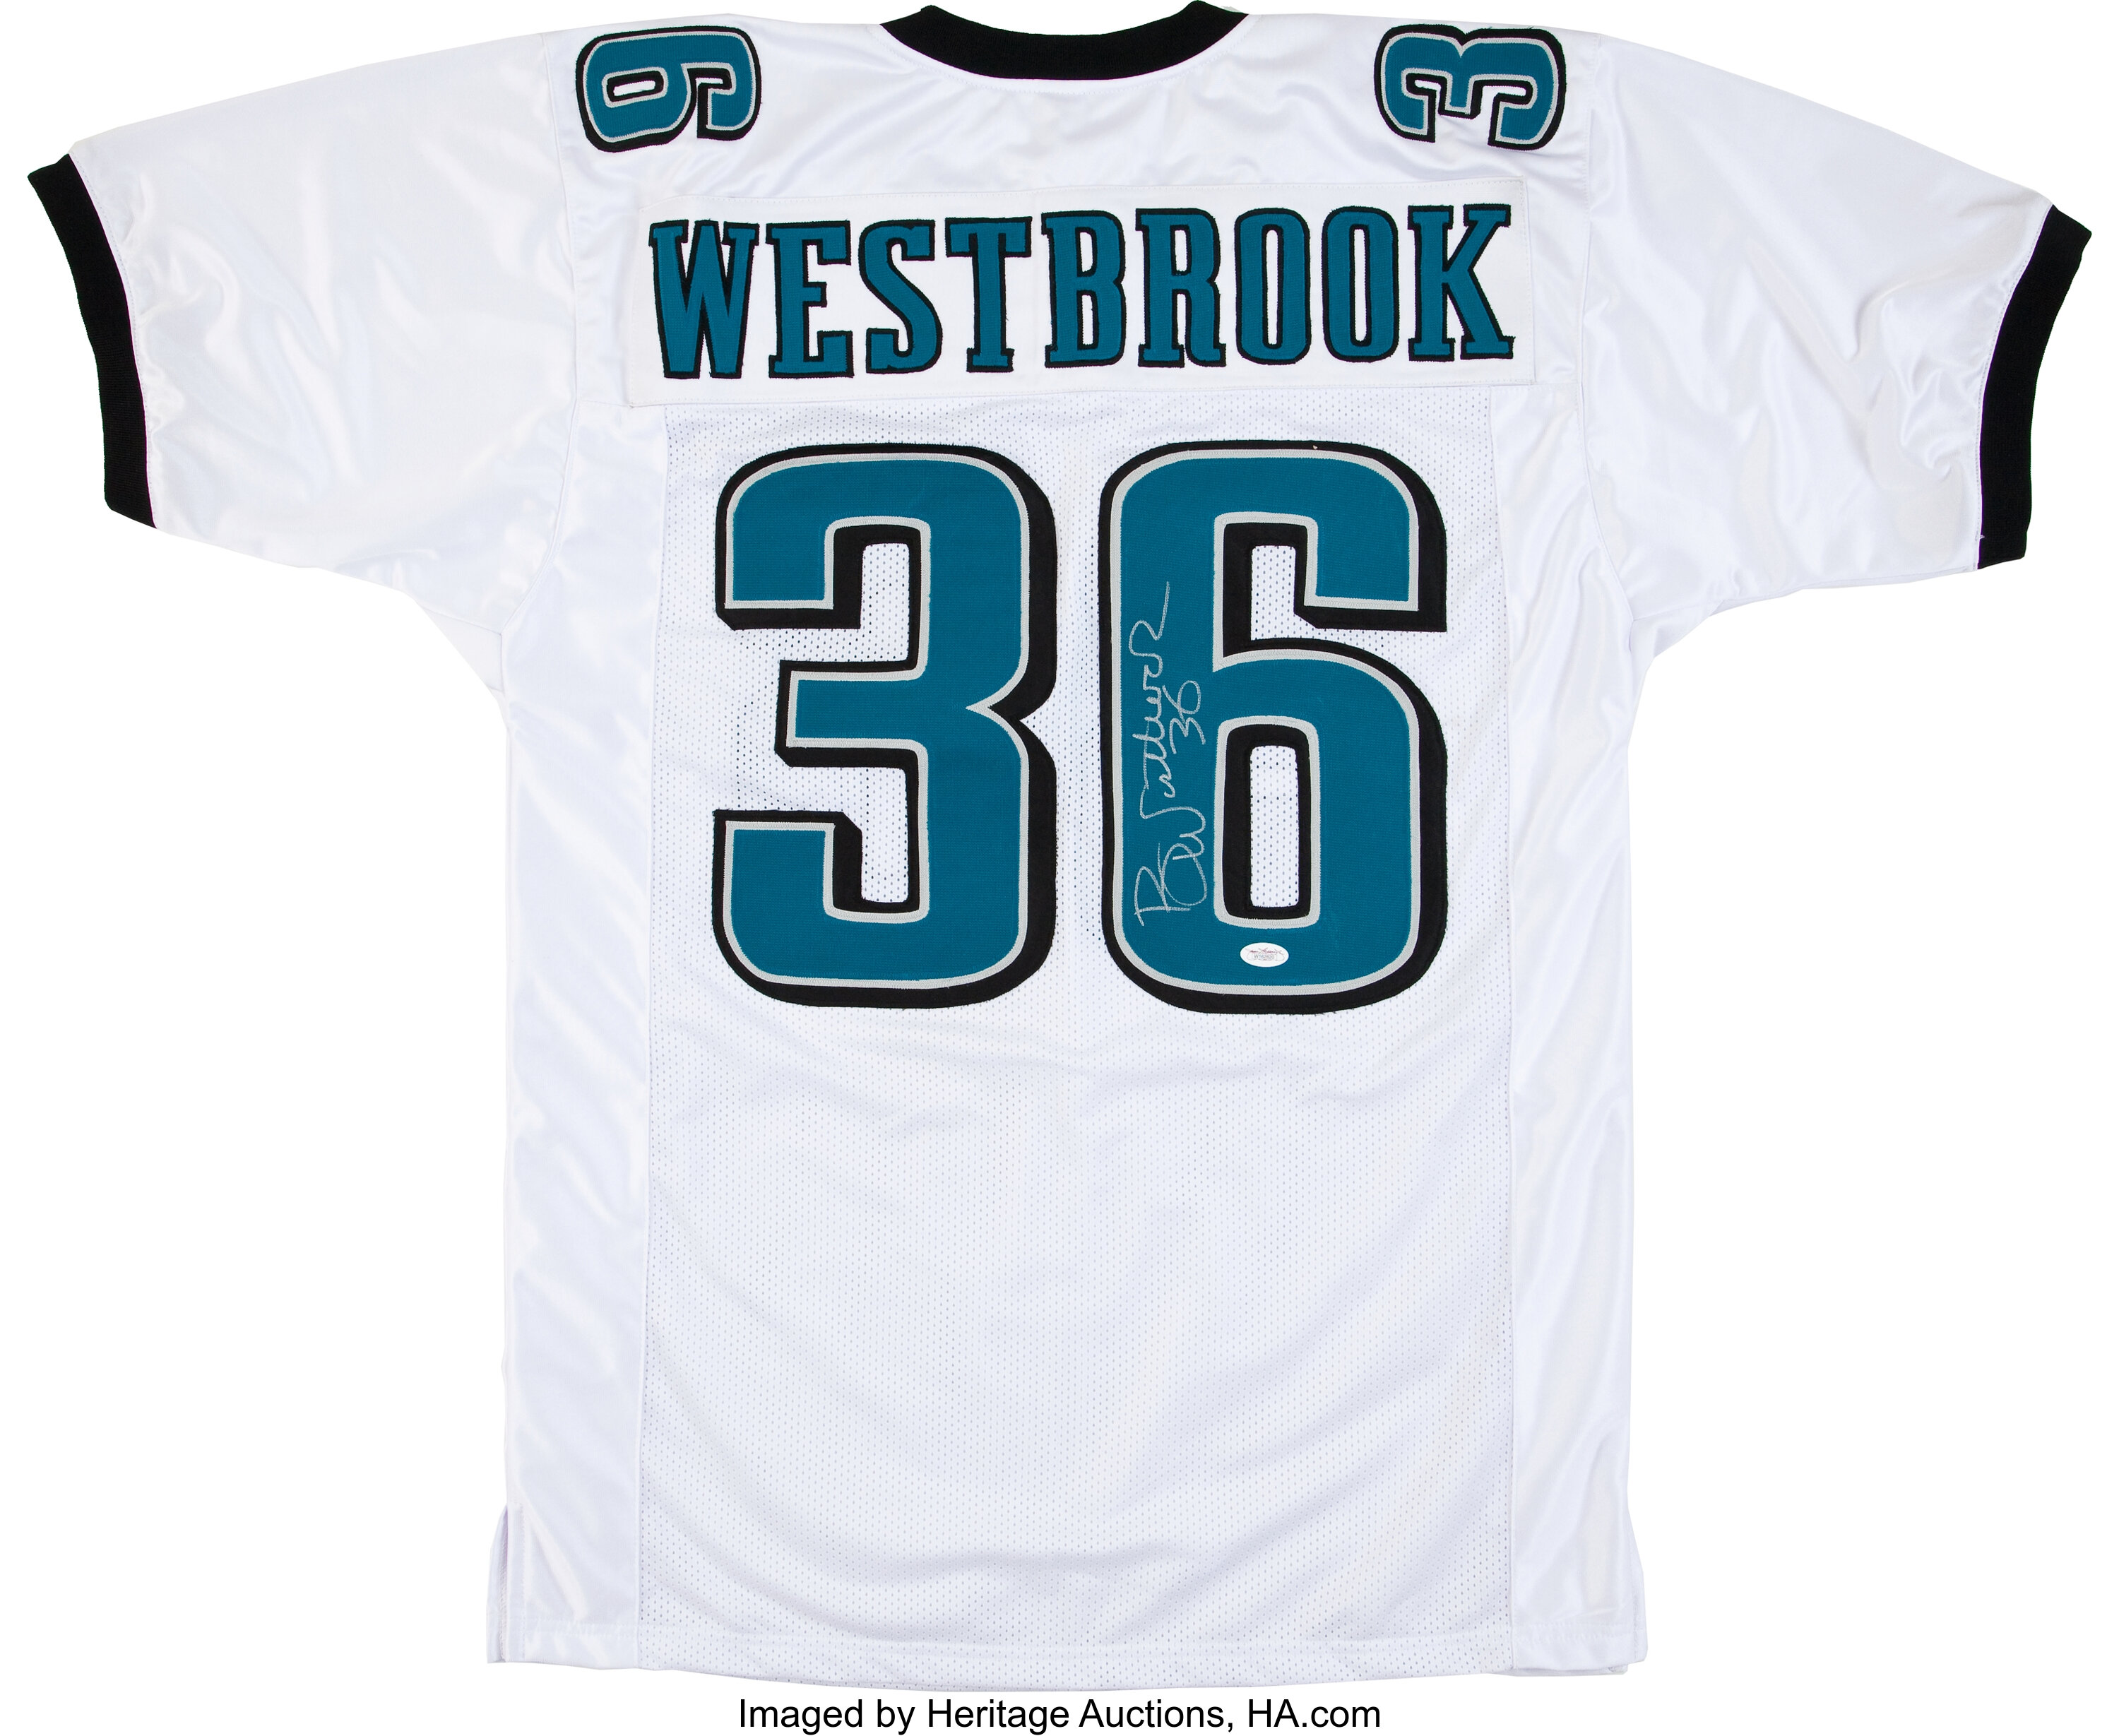 Brian Westbrook Signed Jersey. Football Collectibles Uniforms